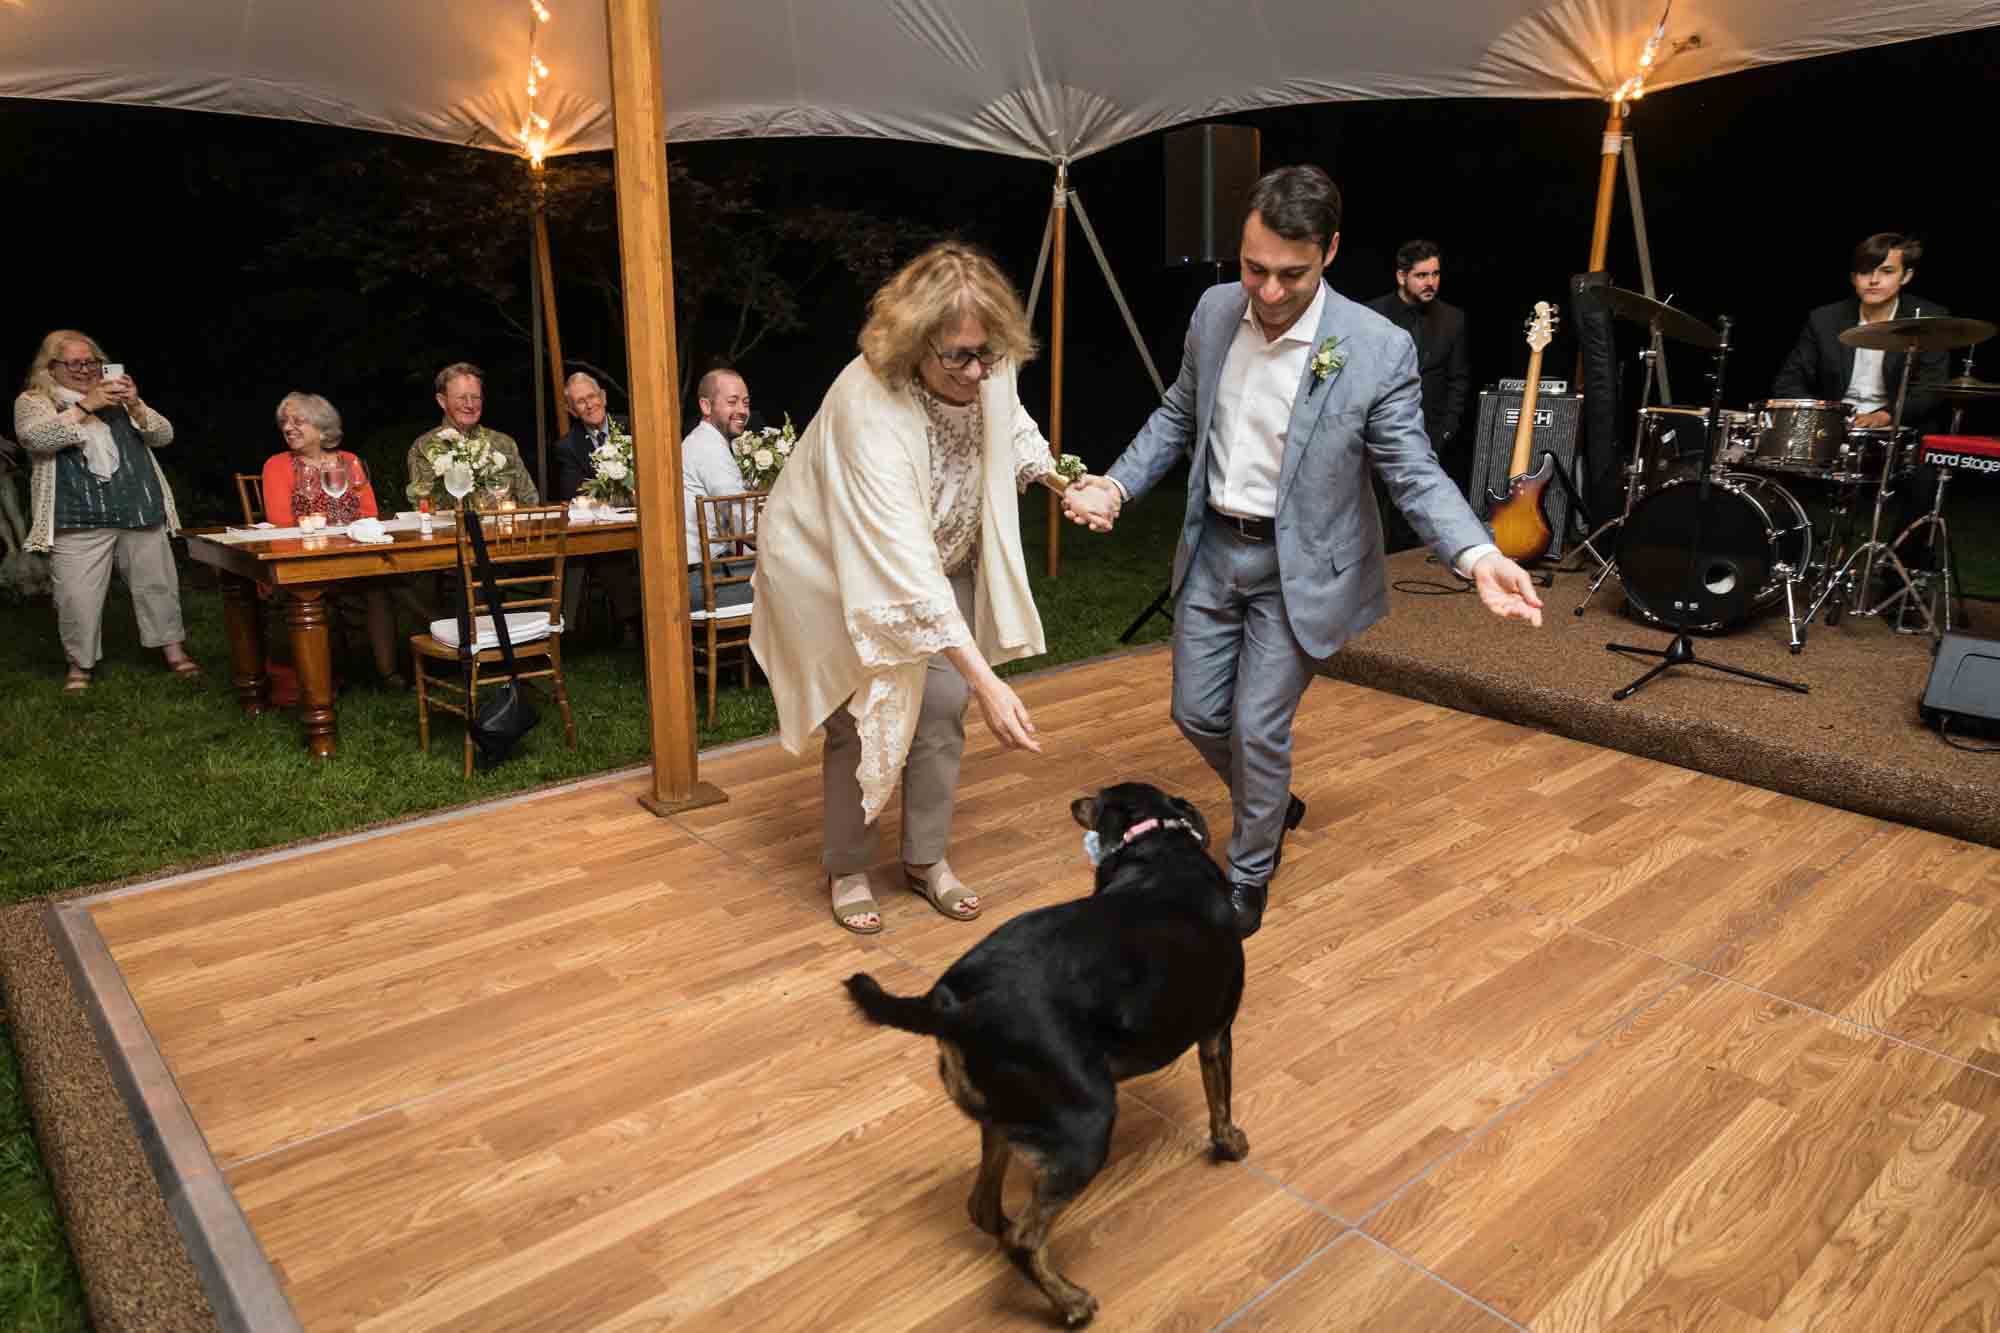 Mother and son dancing with dog for an article on backyard wedding tips